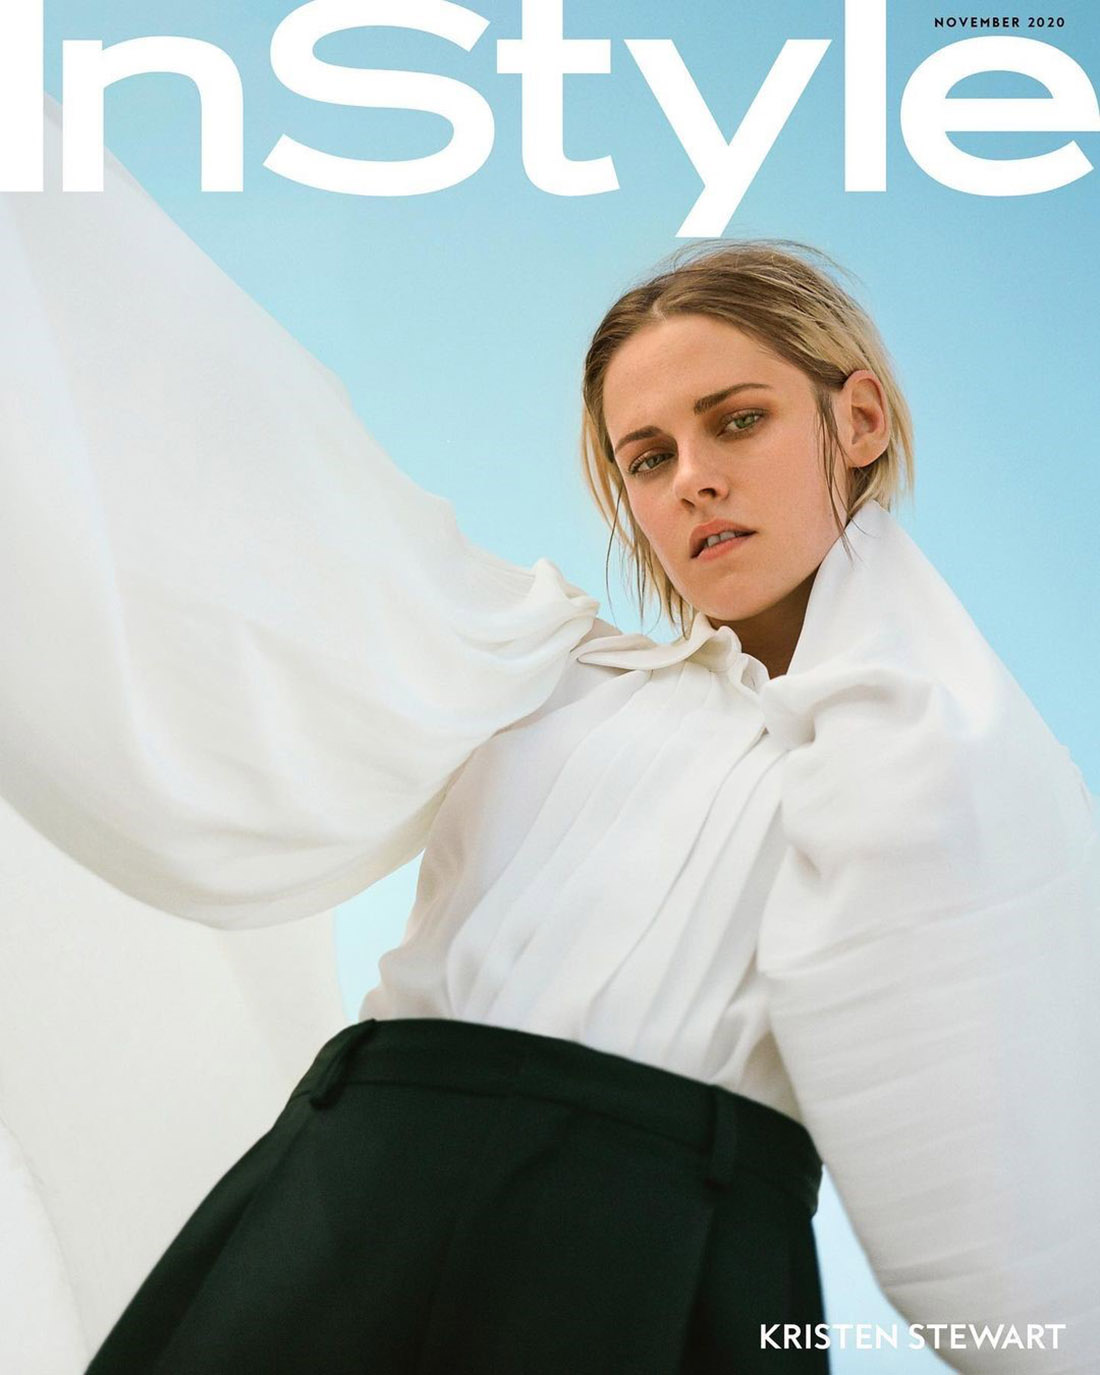 Kristen Stewart covers InStyle US November 2020 by Olivia Malone